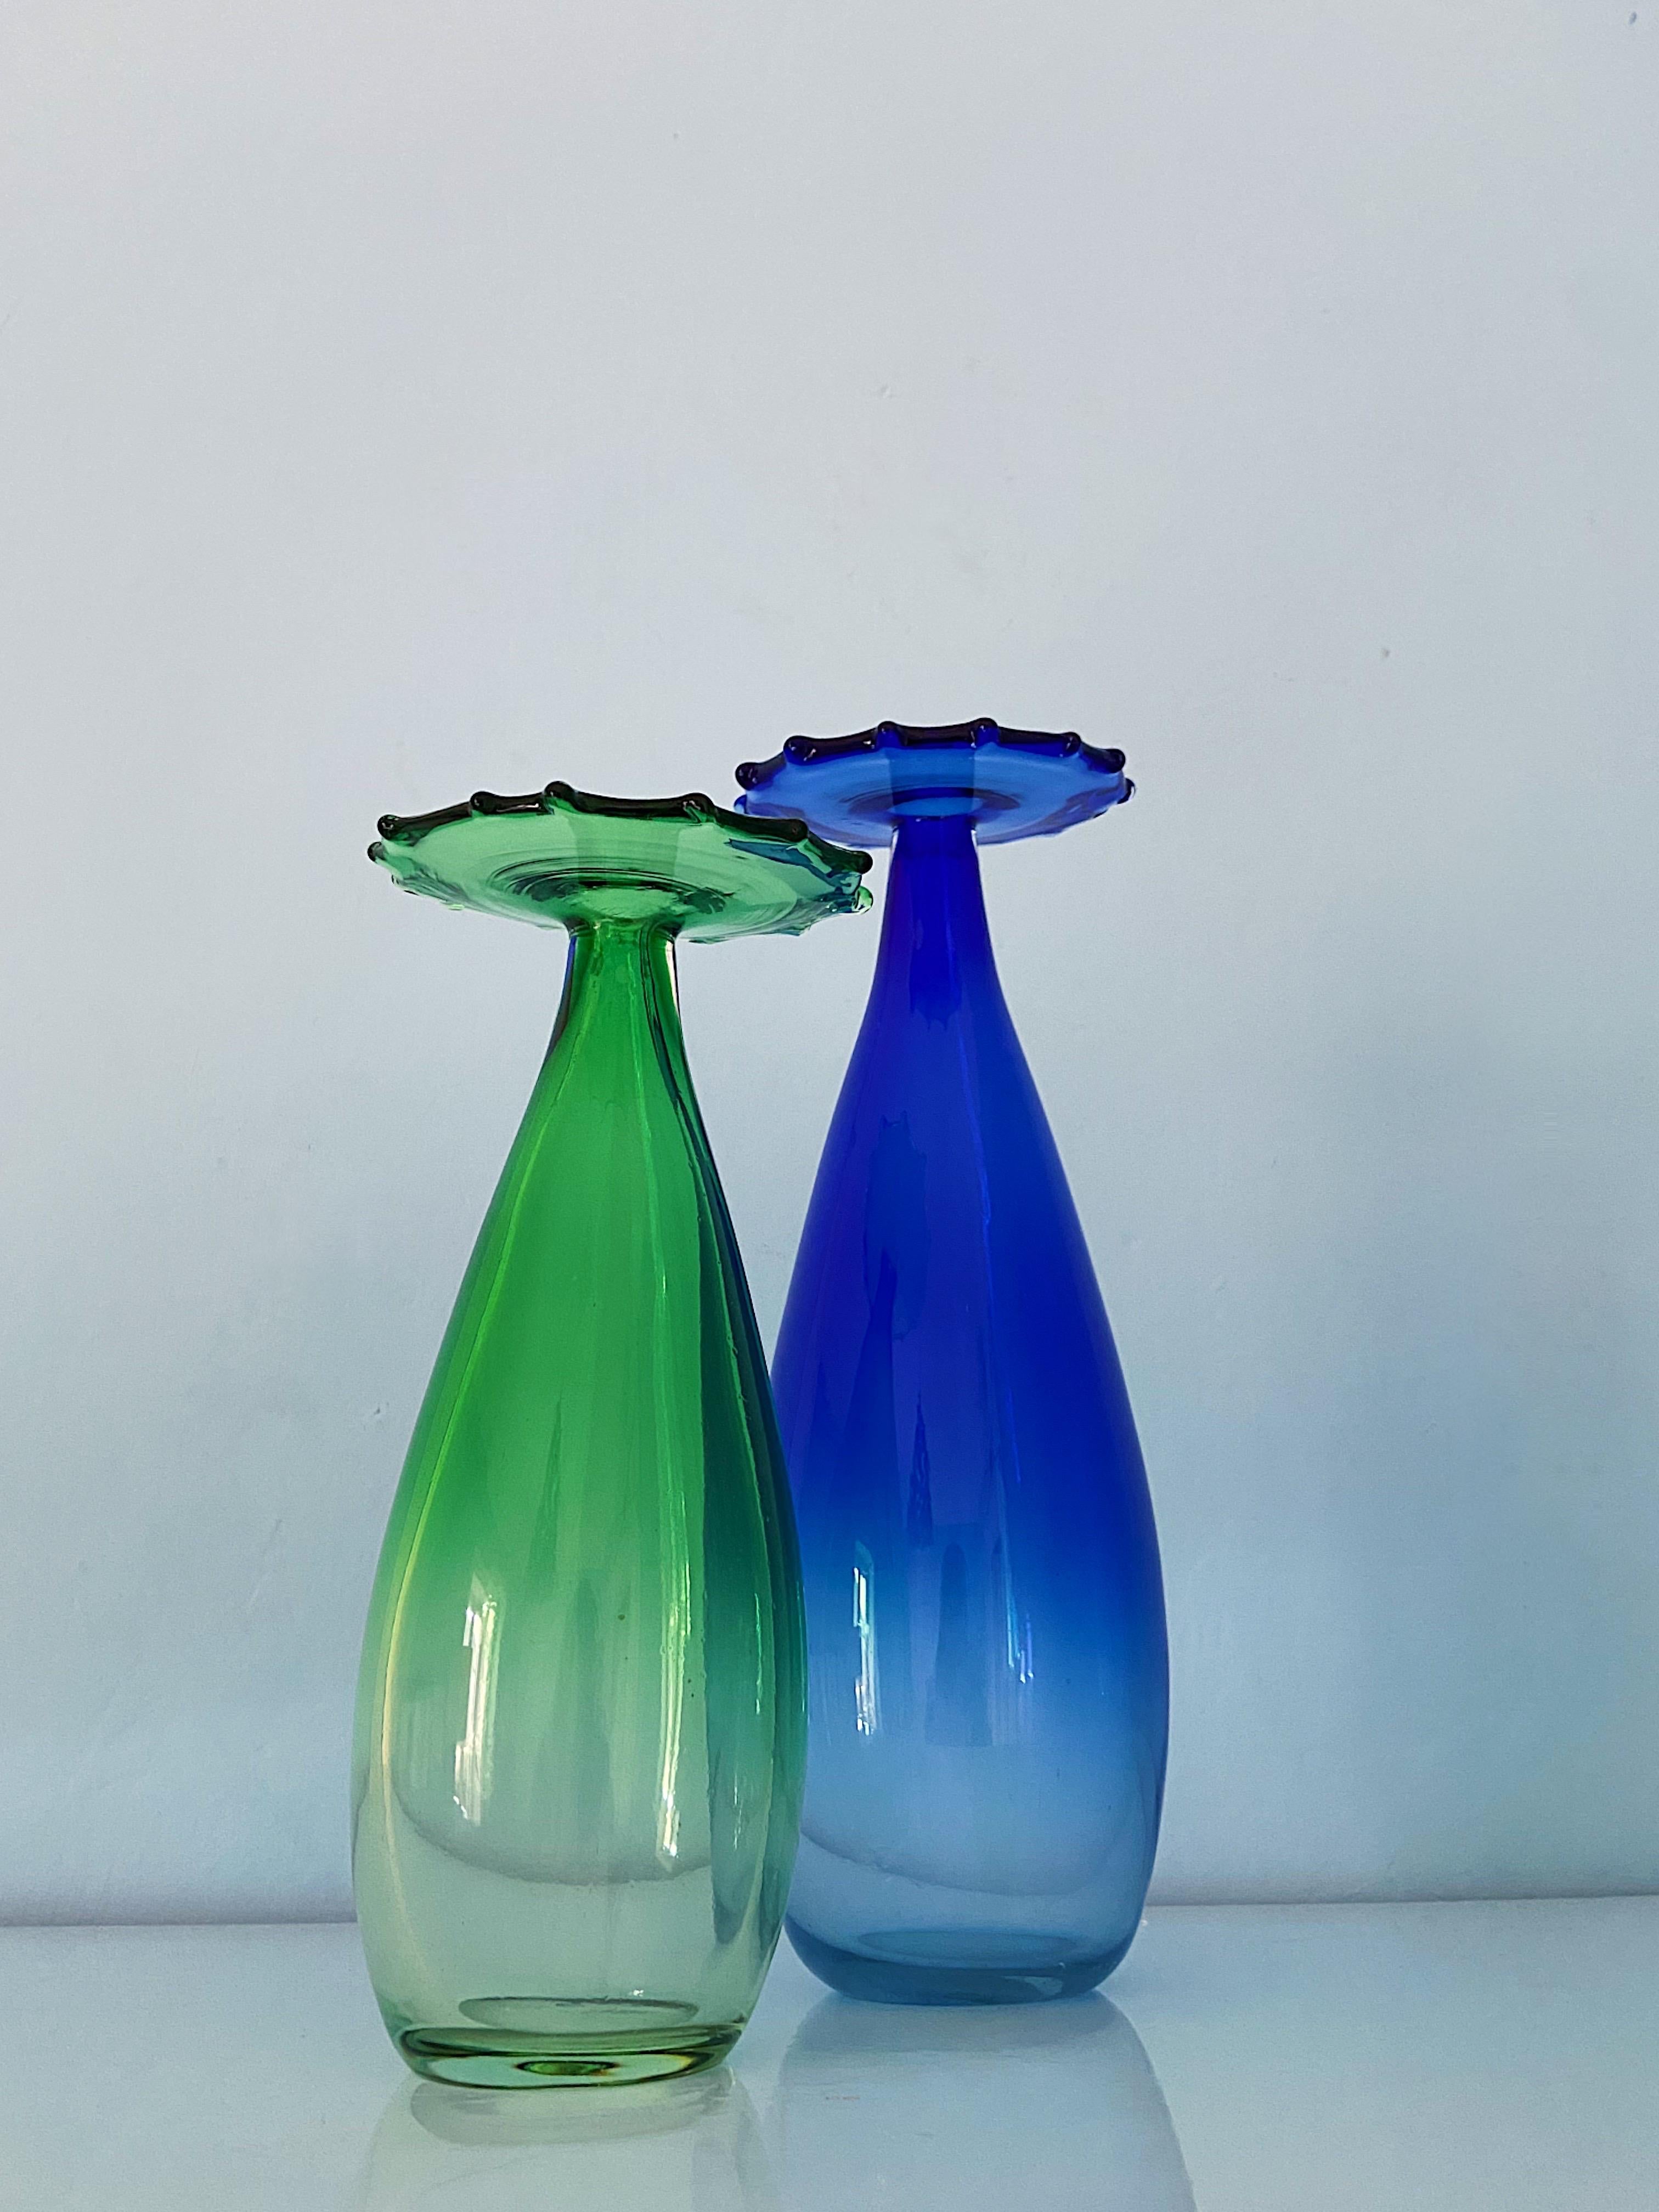 Pair of beautiful Murano glass vases signed La Murrina, 1970s.
Asymmetric base with a flower like top. The color graduates from transparent glass into strong green and blue color.
Both vases are signed in the glass. Sold as a